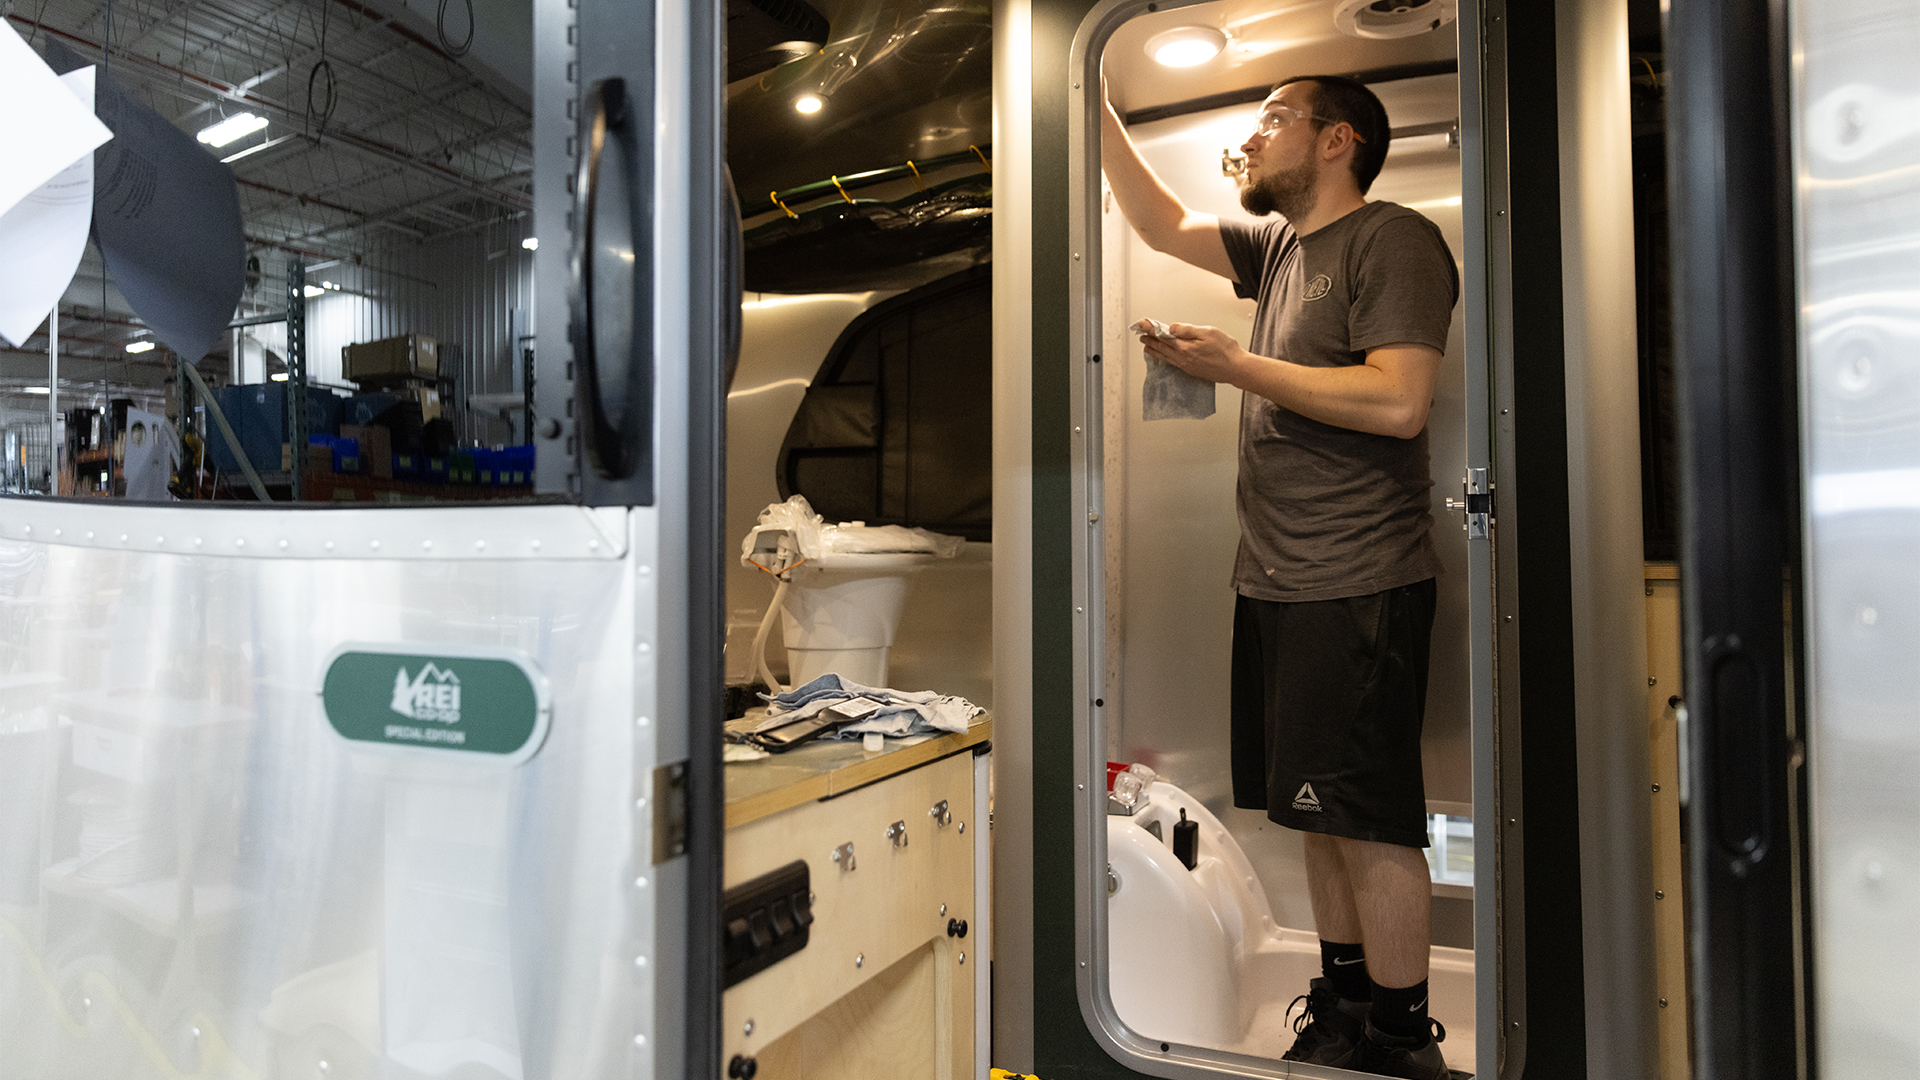 An Airstream employee working on building the interior of an Airstream Basecamp travel trailer